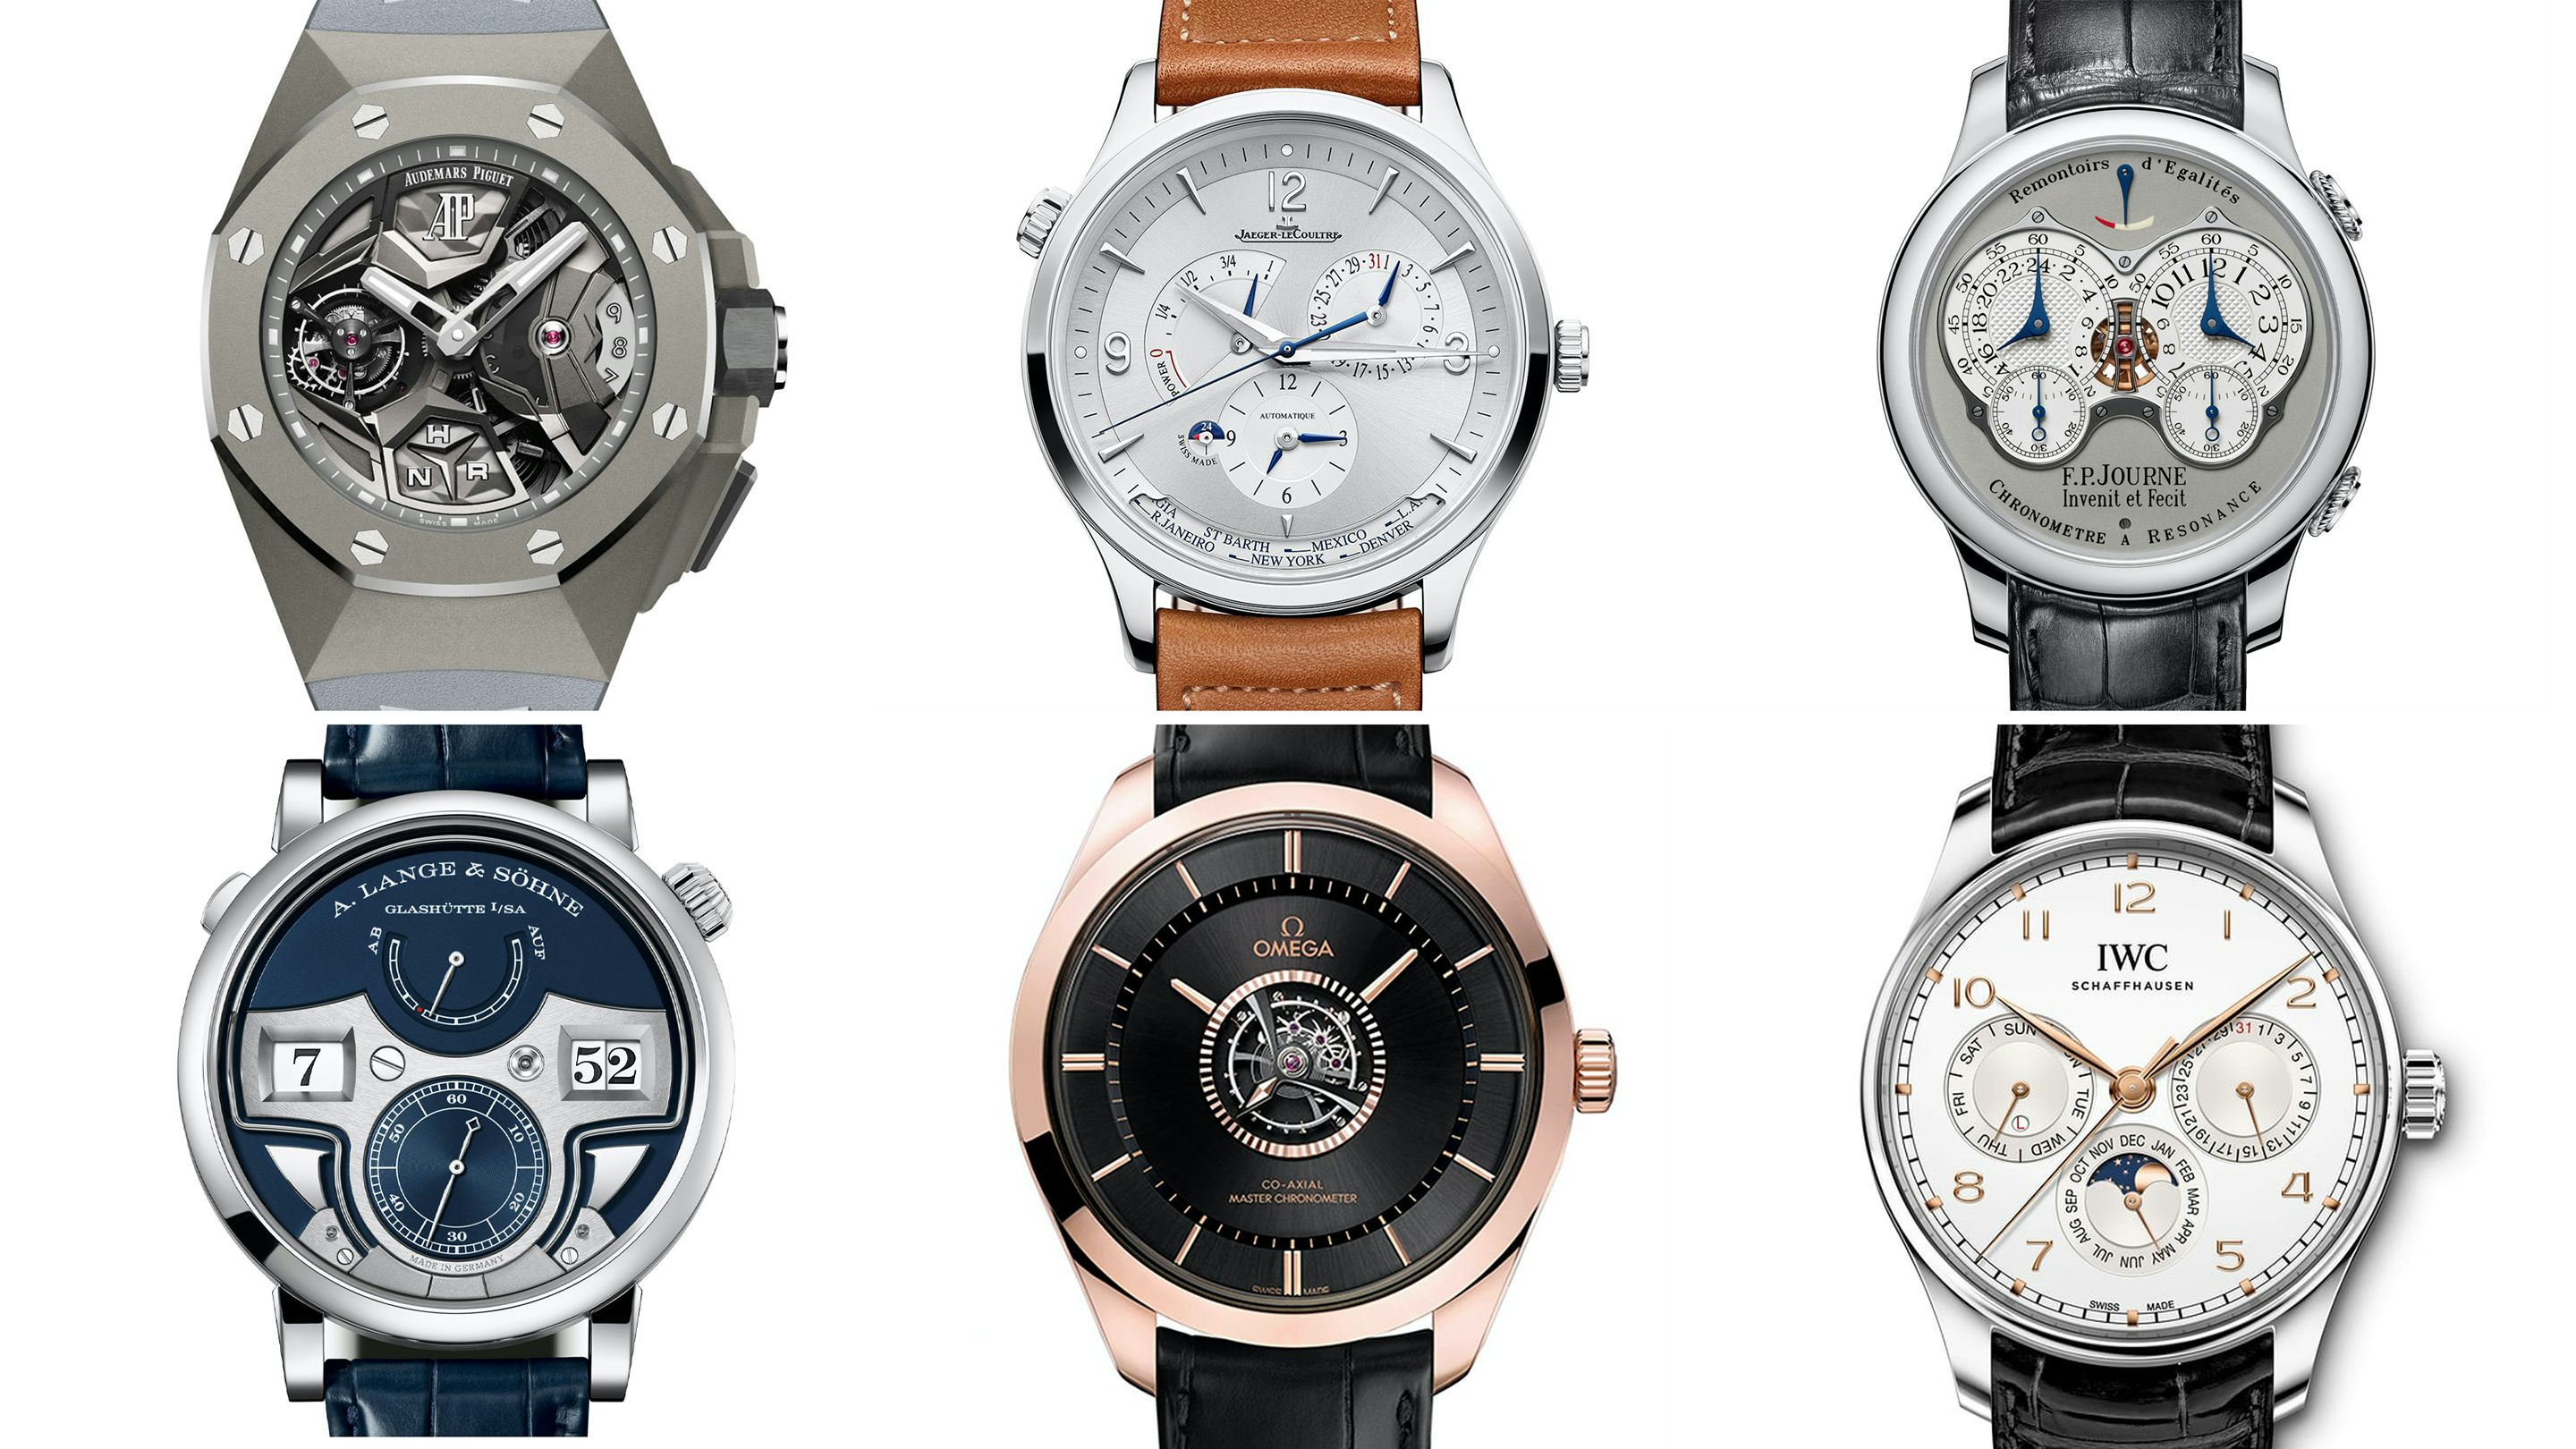 Editors' Our Favorite New Complicated Watches From The 2020 Releases